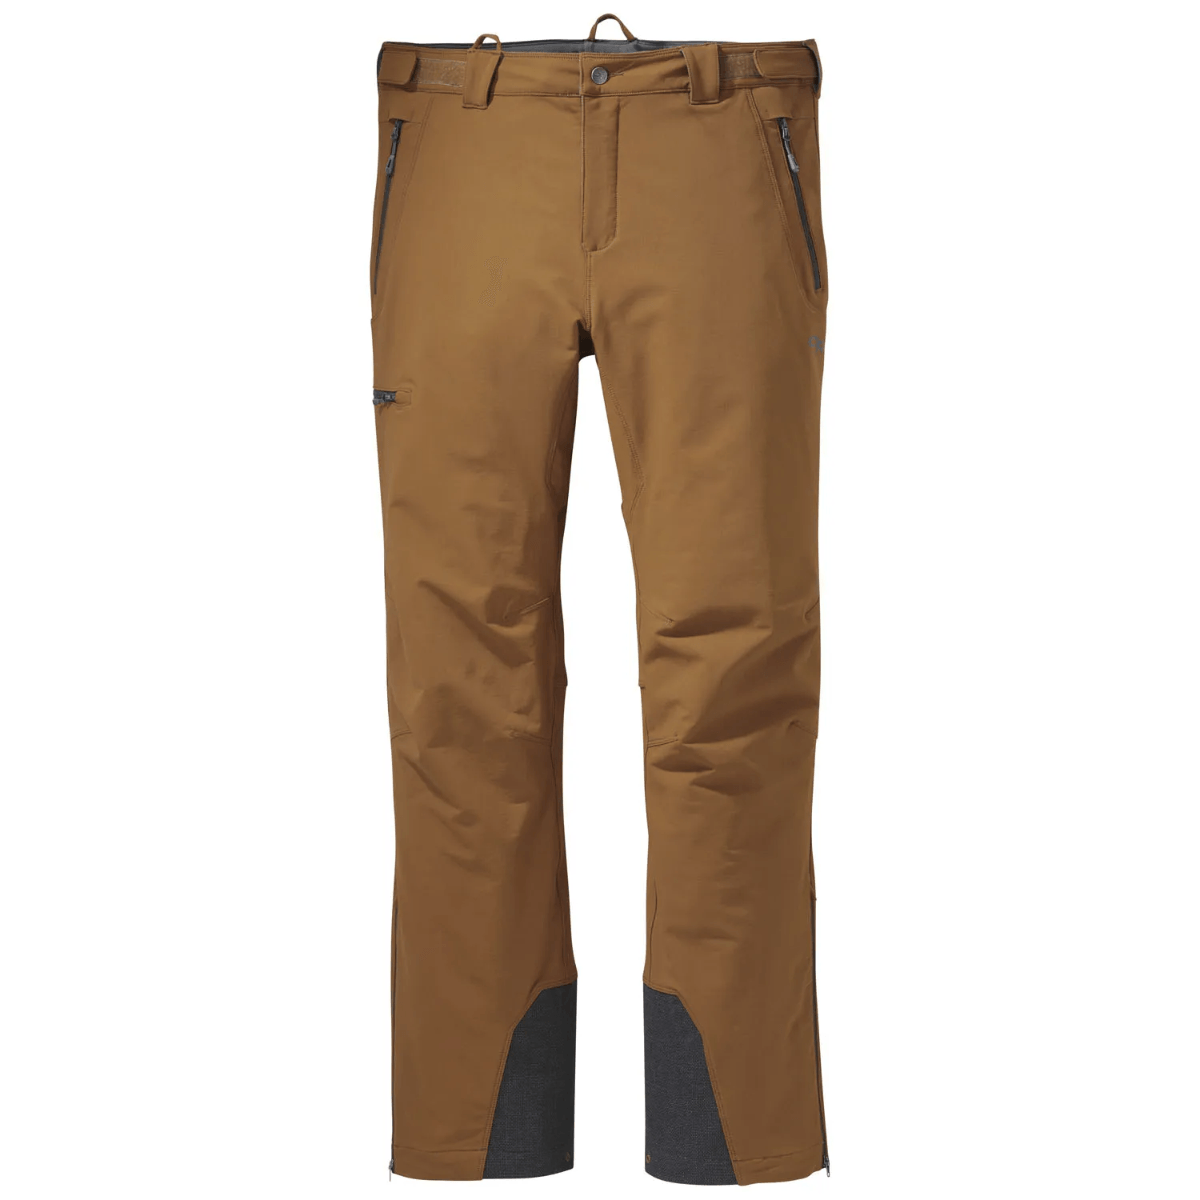 Plus Size Outdoor Research Women's Softshell Pants - Cirque II